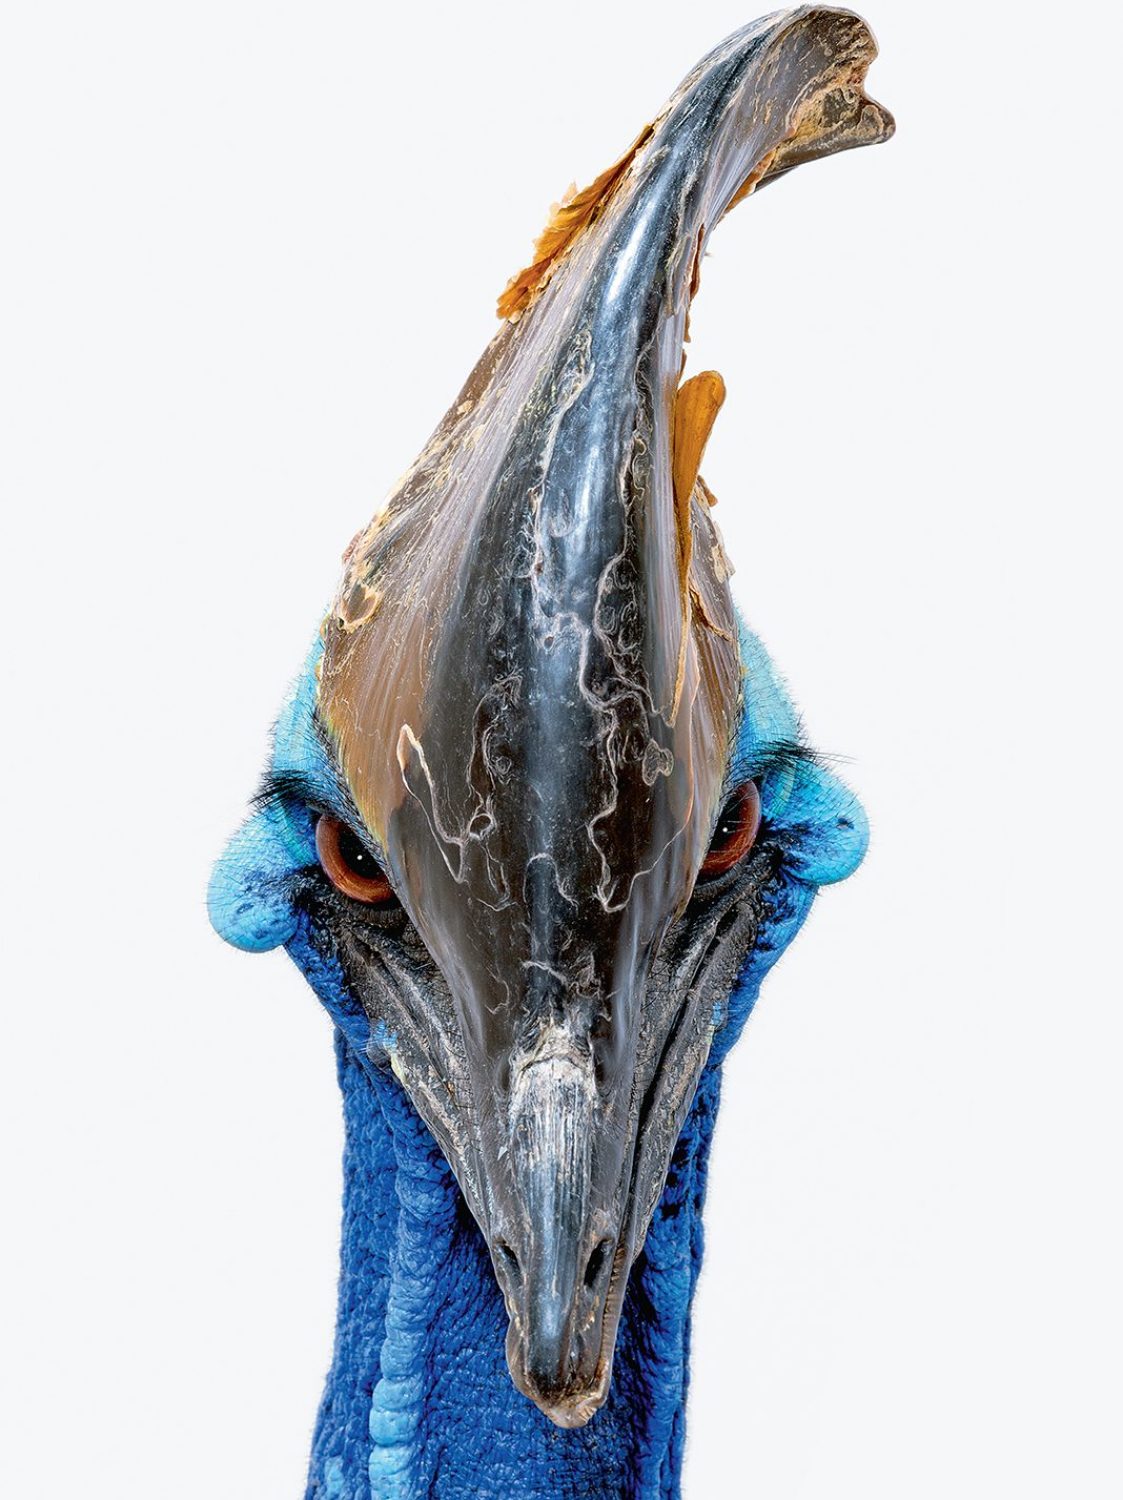 Southern cassowary (Robert Clark/Published by Phaidon)